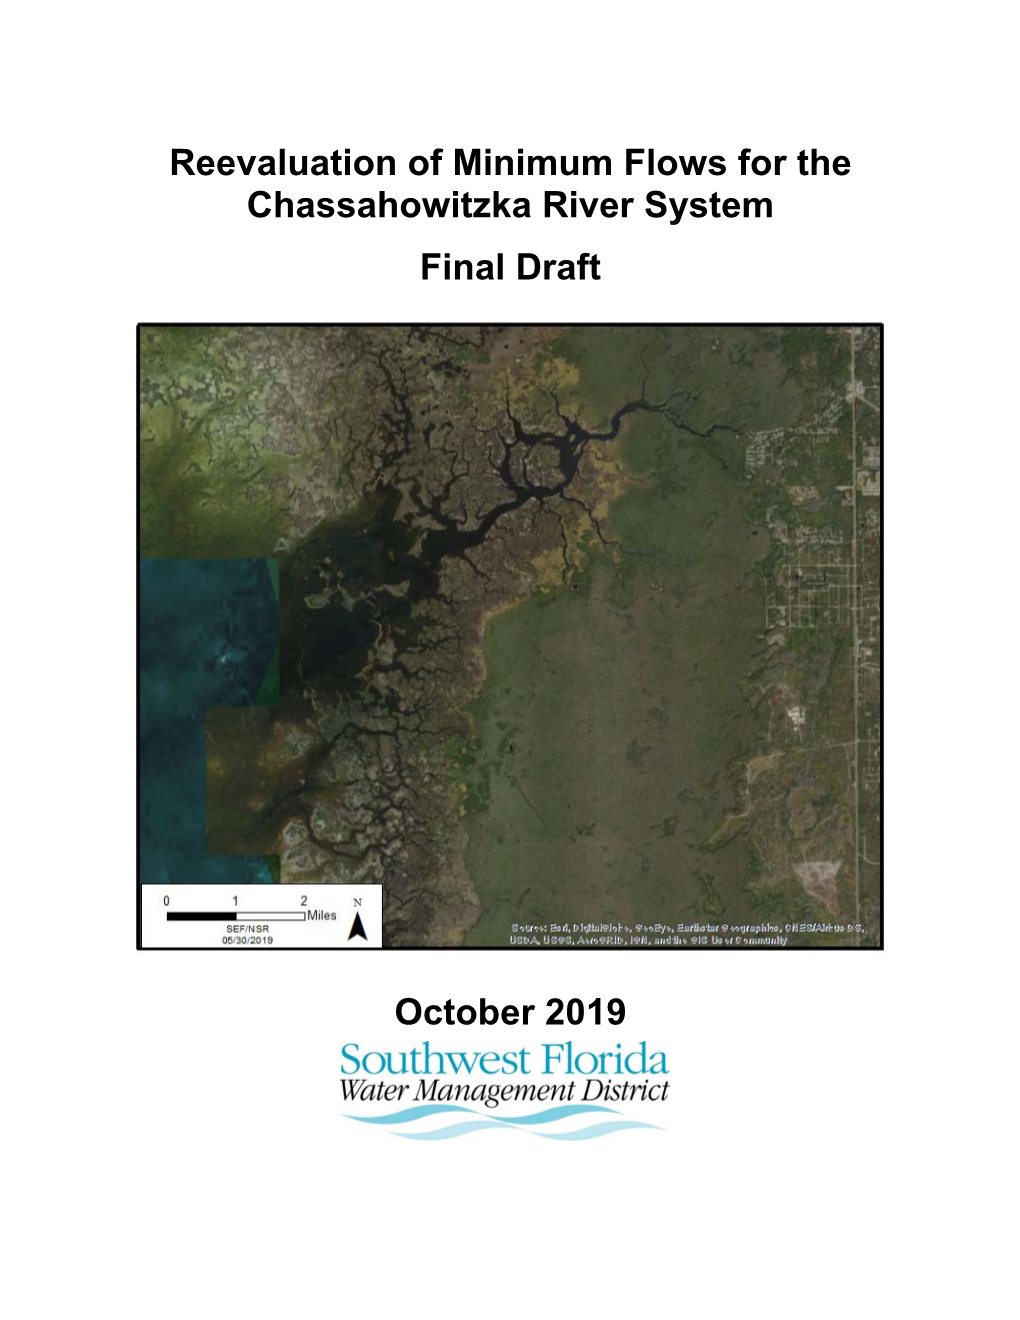 Reevaluation of Minimum Flows for the Chassahowitzka River System Final Draft